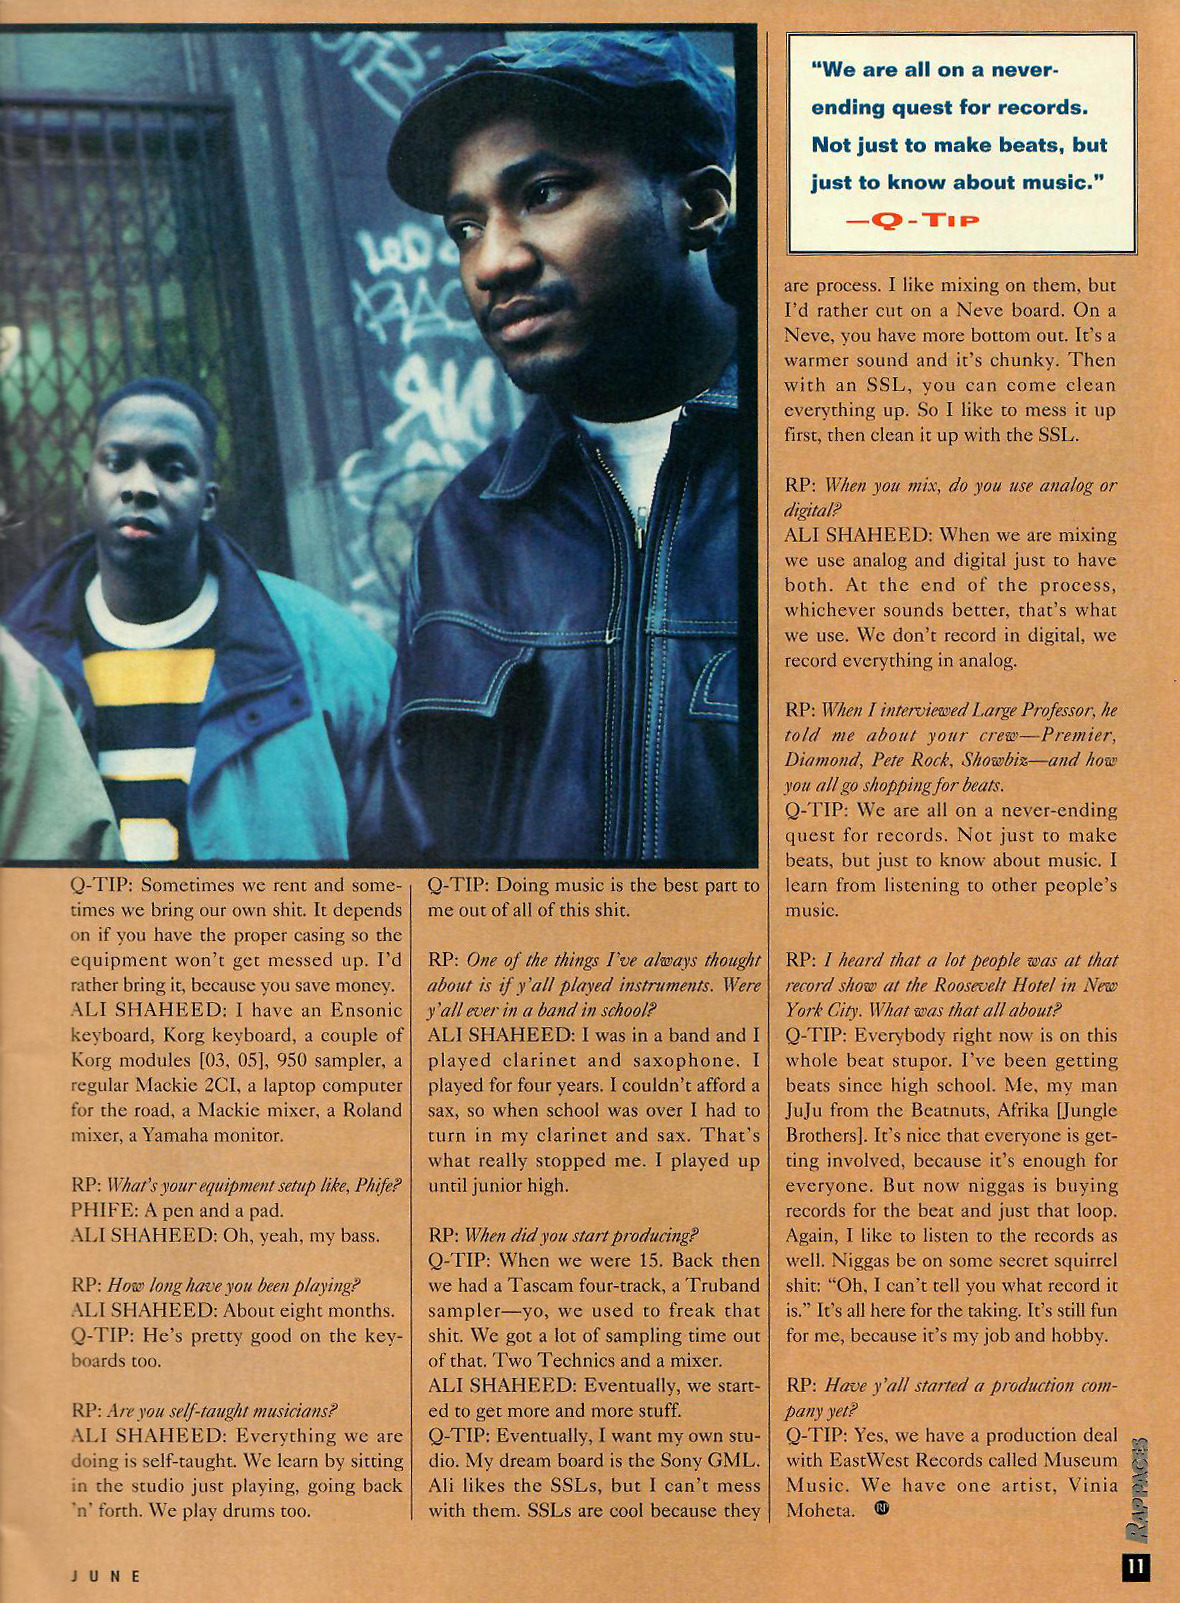 HipHop-TheGoldenEra: A Tribe Called Quest in Rap Pages - 1994